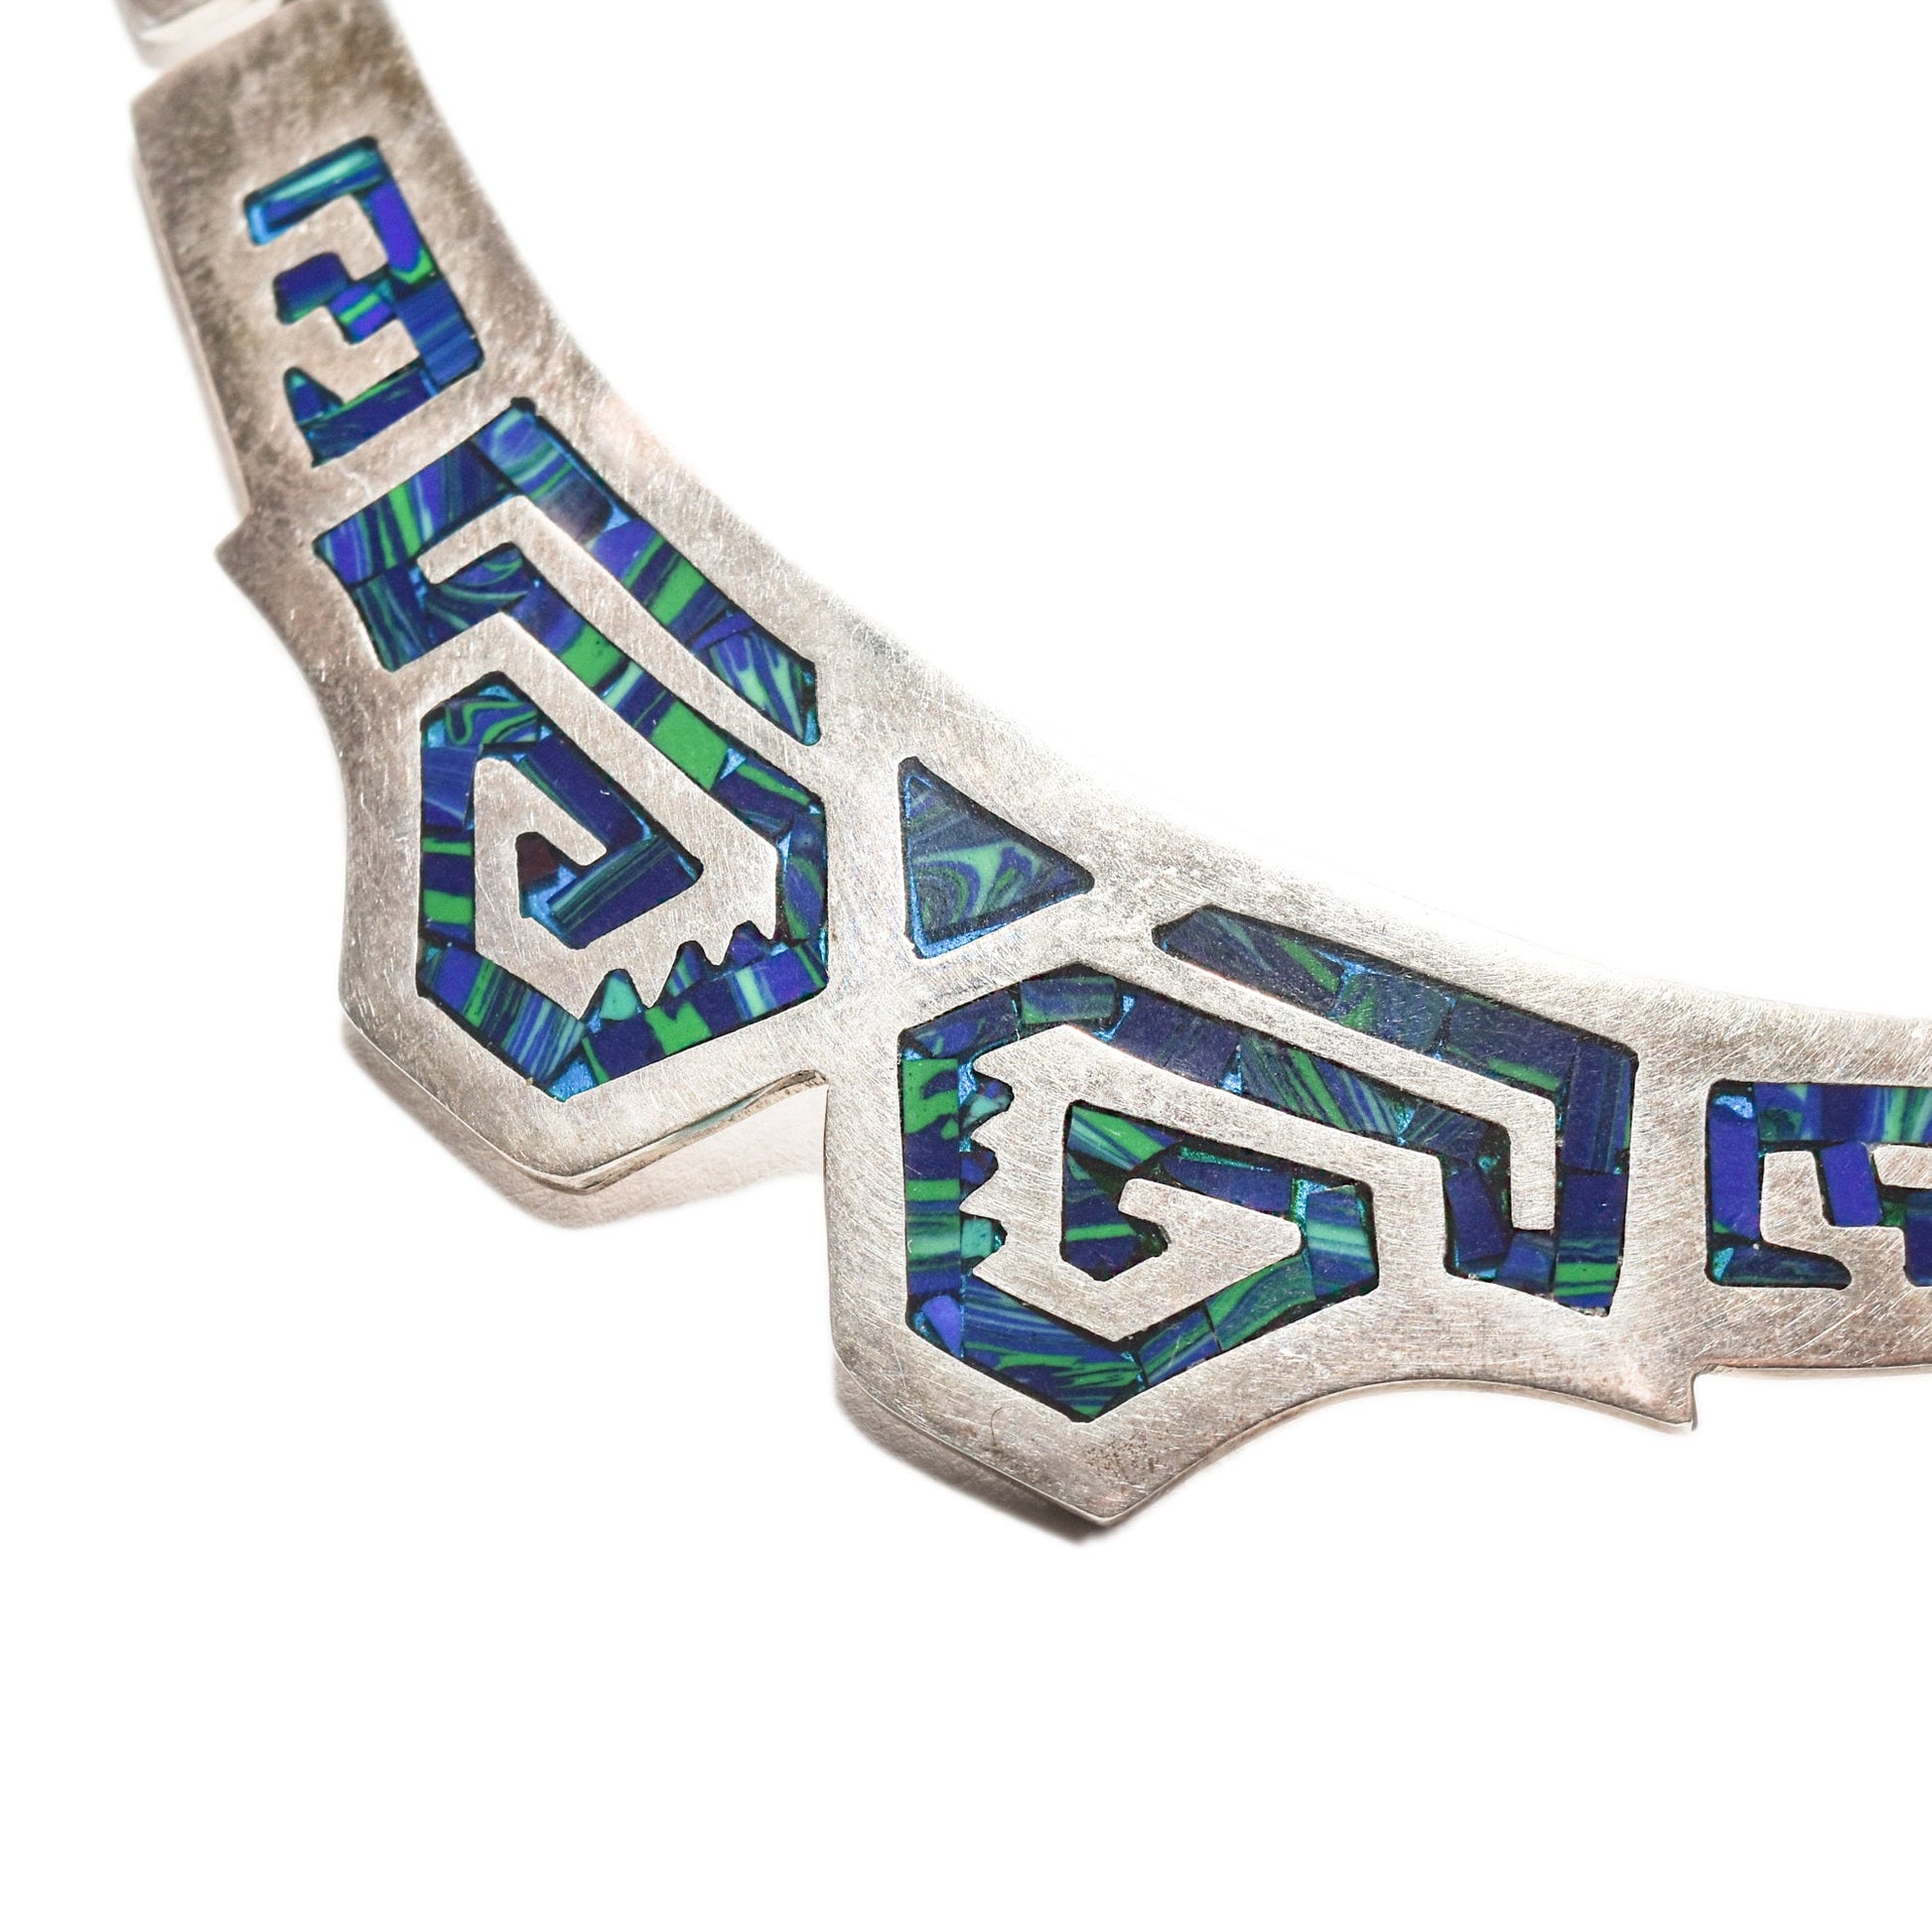 Modernist TAXCO sterling silver collar necklace with blue and green mosaic inlay in a tribal design, measuring 17.5 inches in length.